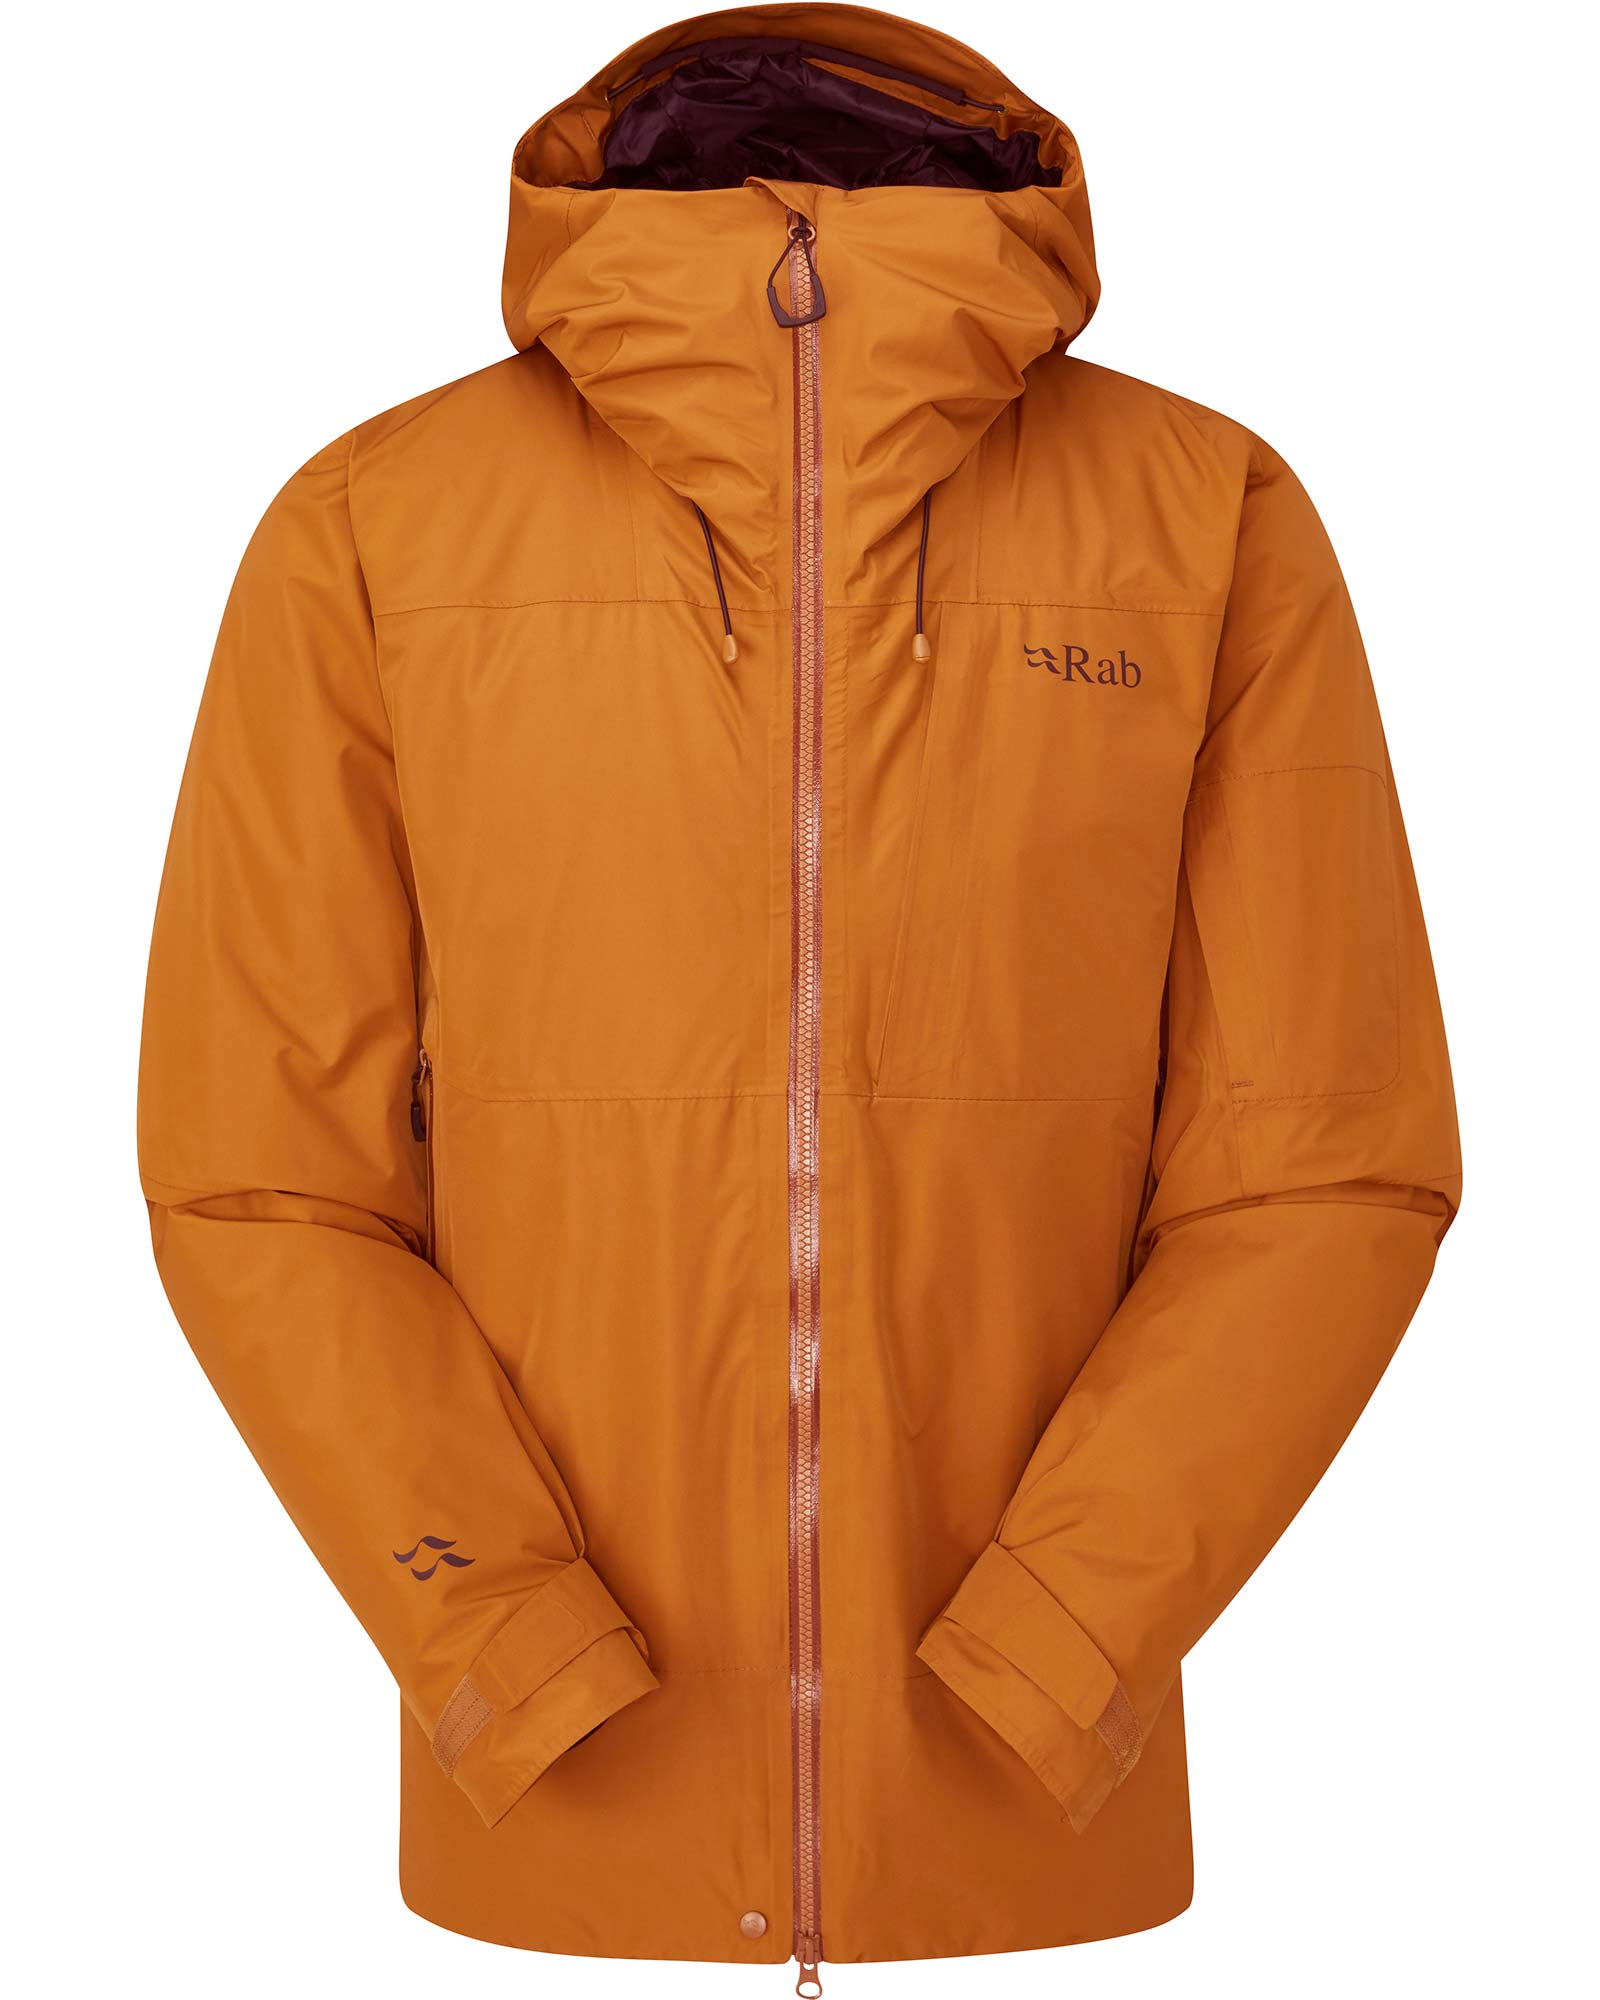 Rab Men's Khroma Volition GORE-TEX Insulated Jacket 0